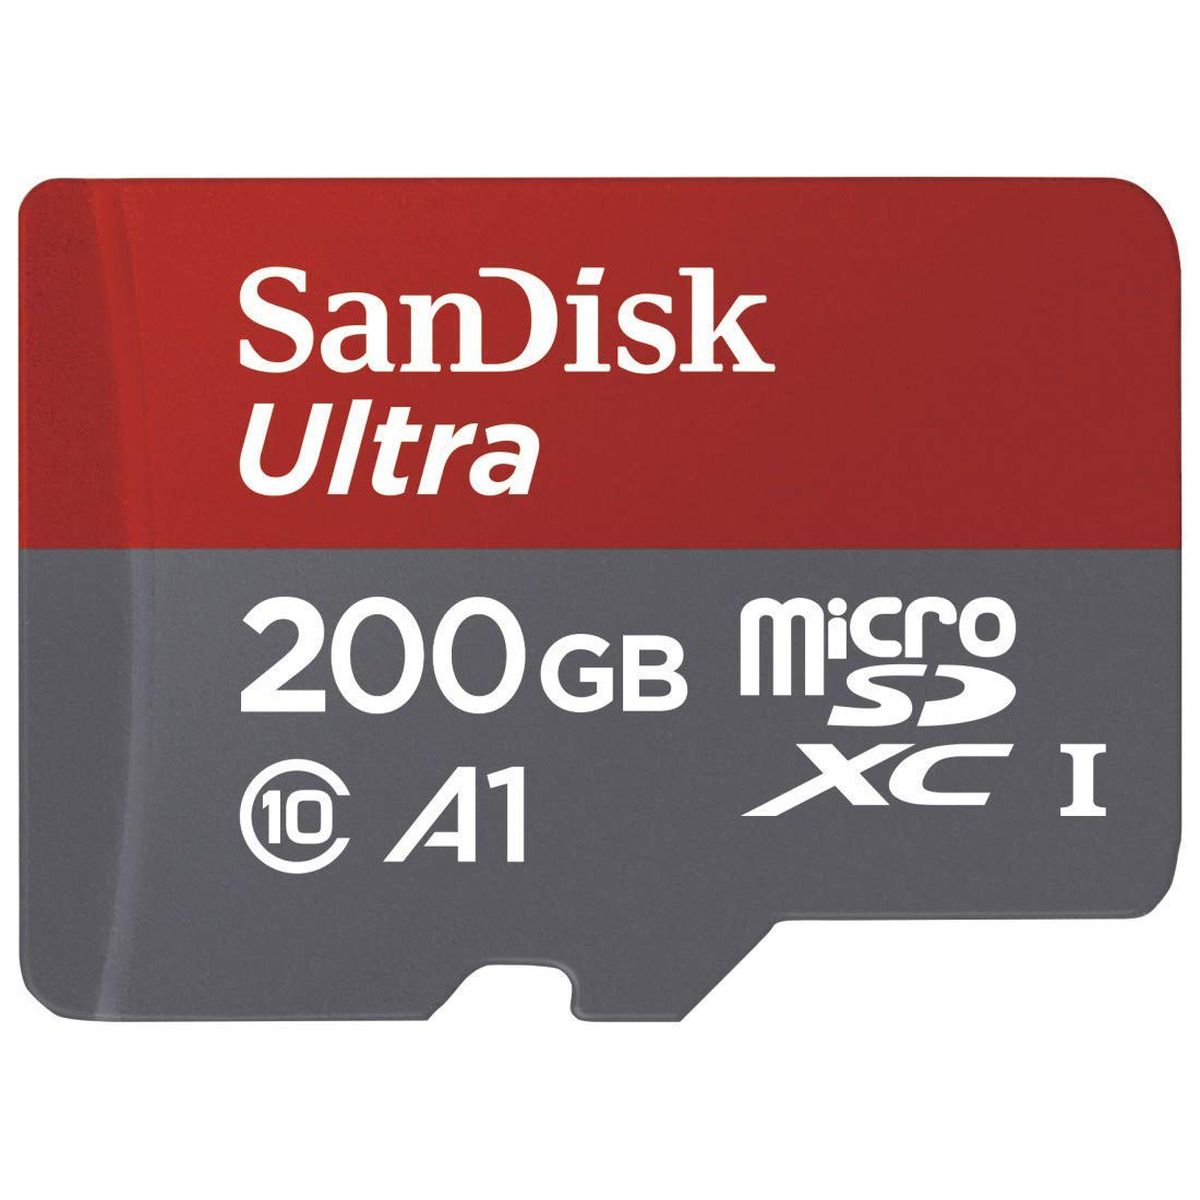 A product shot of the Sandisk Ultra 200 GB microSD